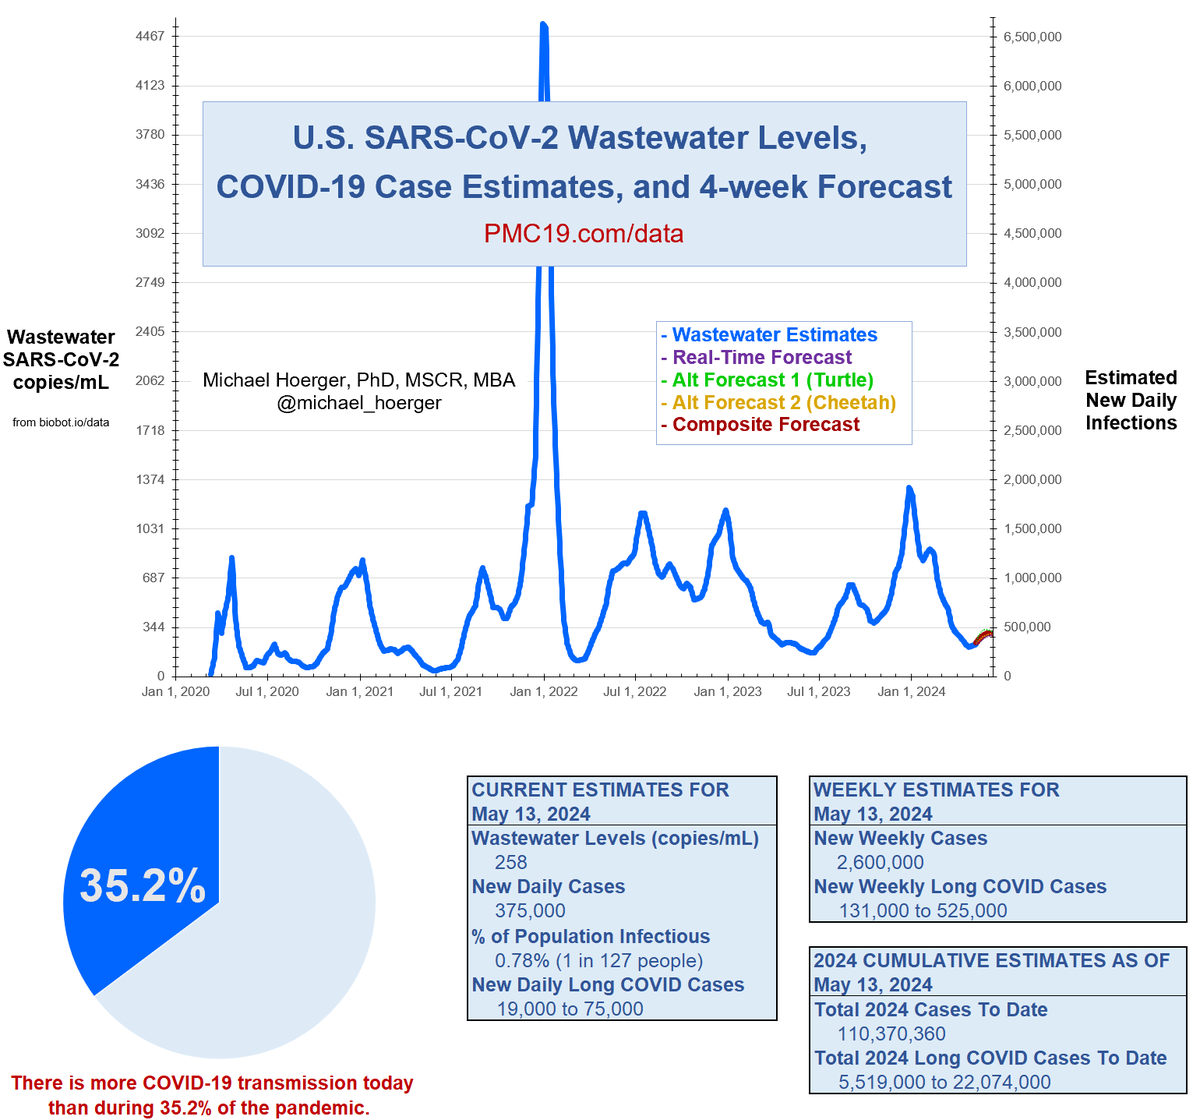 PMC COVID-19 Forecast, May 13, 2024 (U.S.) Expect transmission to hover around 350,000-500,000 infections/day through mid-July. Transmission has increased the past 2 weeks. Now we have some clarity on the forecast (red line). It looks like we should fall short of the 500K mark